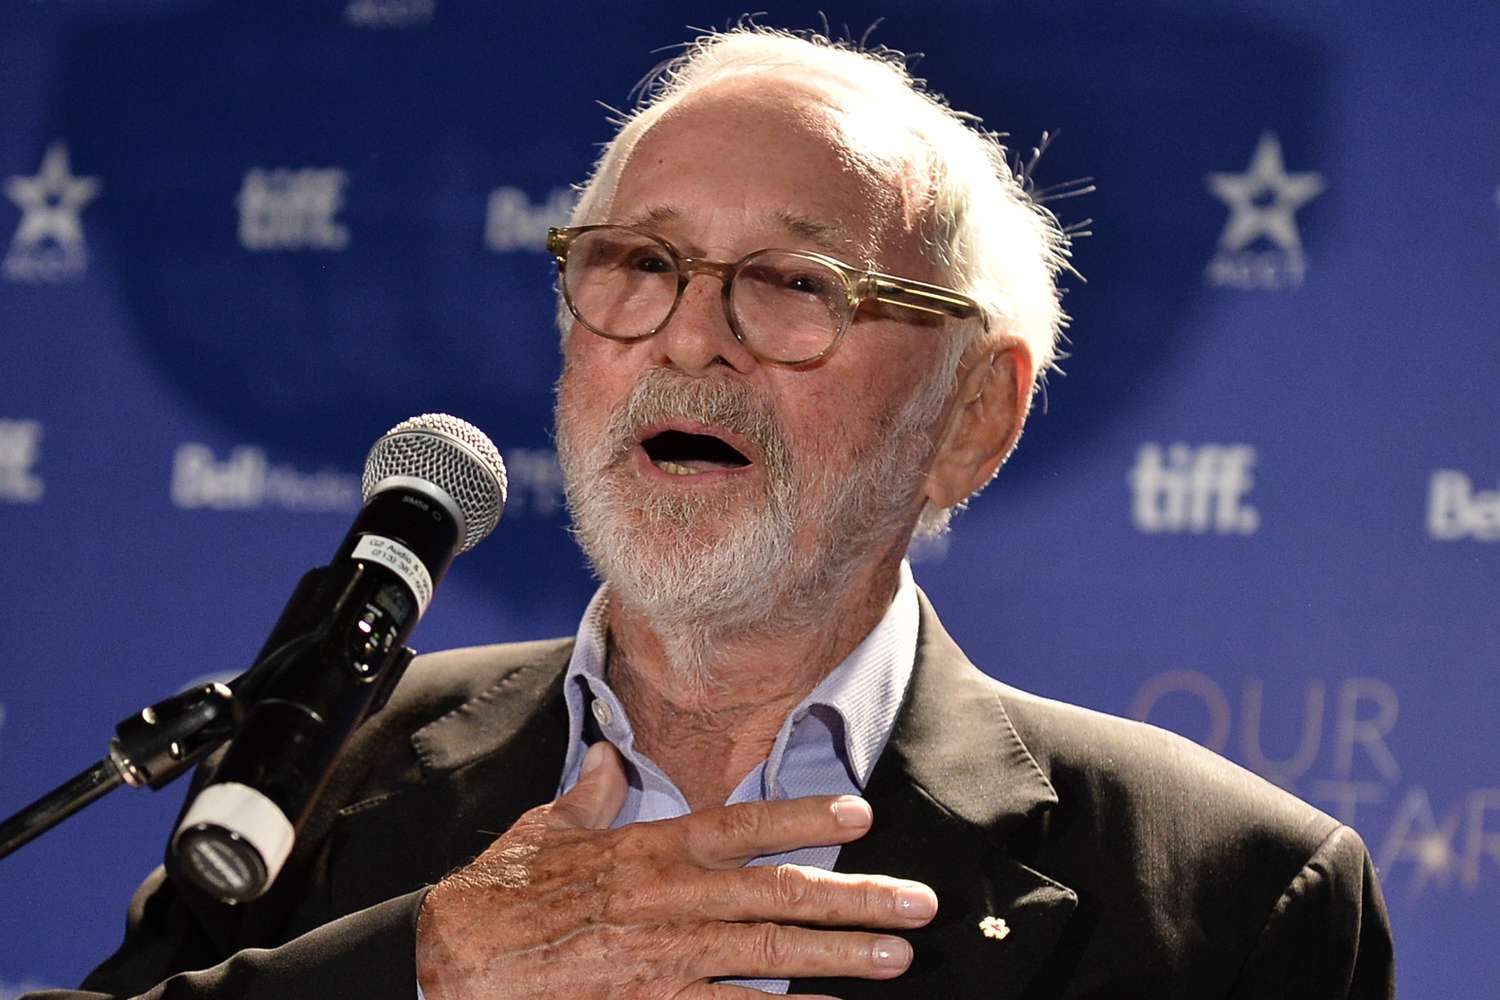 Remembering The Legacy Of Norman Jewison, Director Of ‘Jesus Christ Superstar’